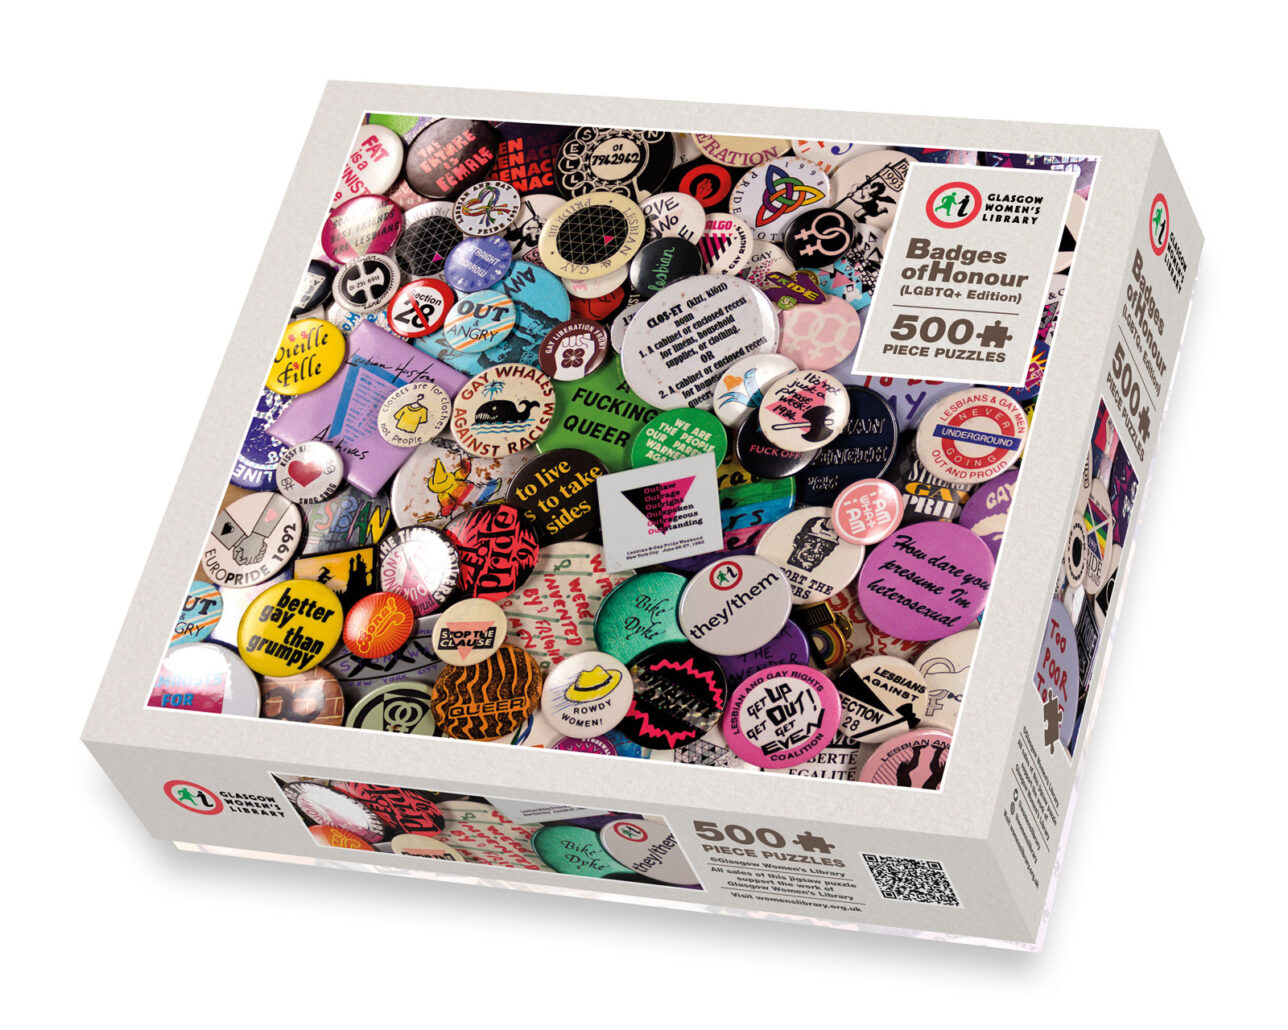 Illustration of the Badges of Honour Jigsaw (LGBTQ+ Edition) box, with an inset photo of many brightly coloured LGBTQ+ slogans